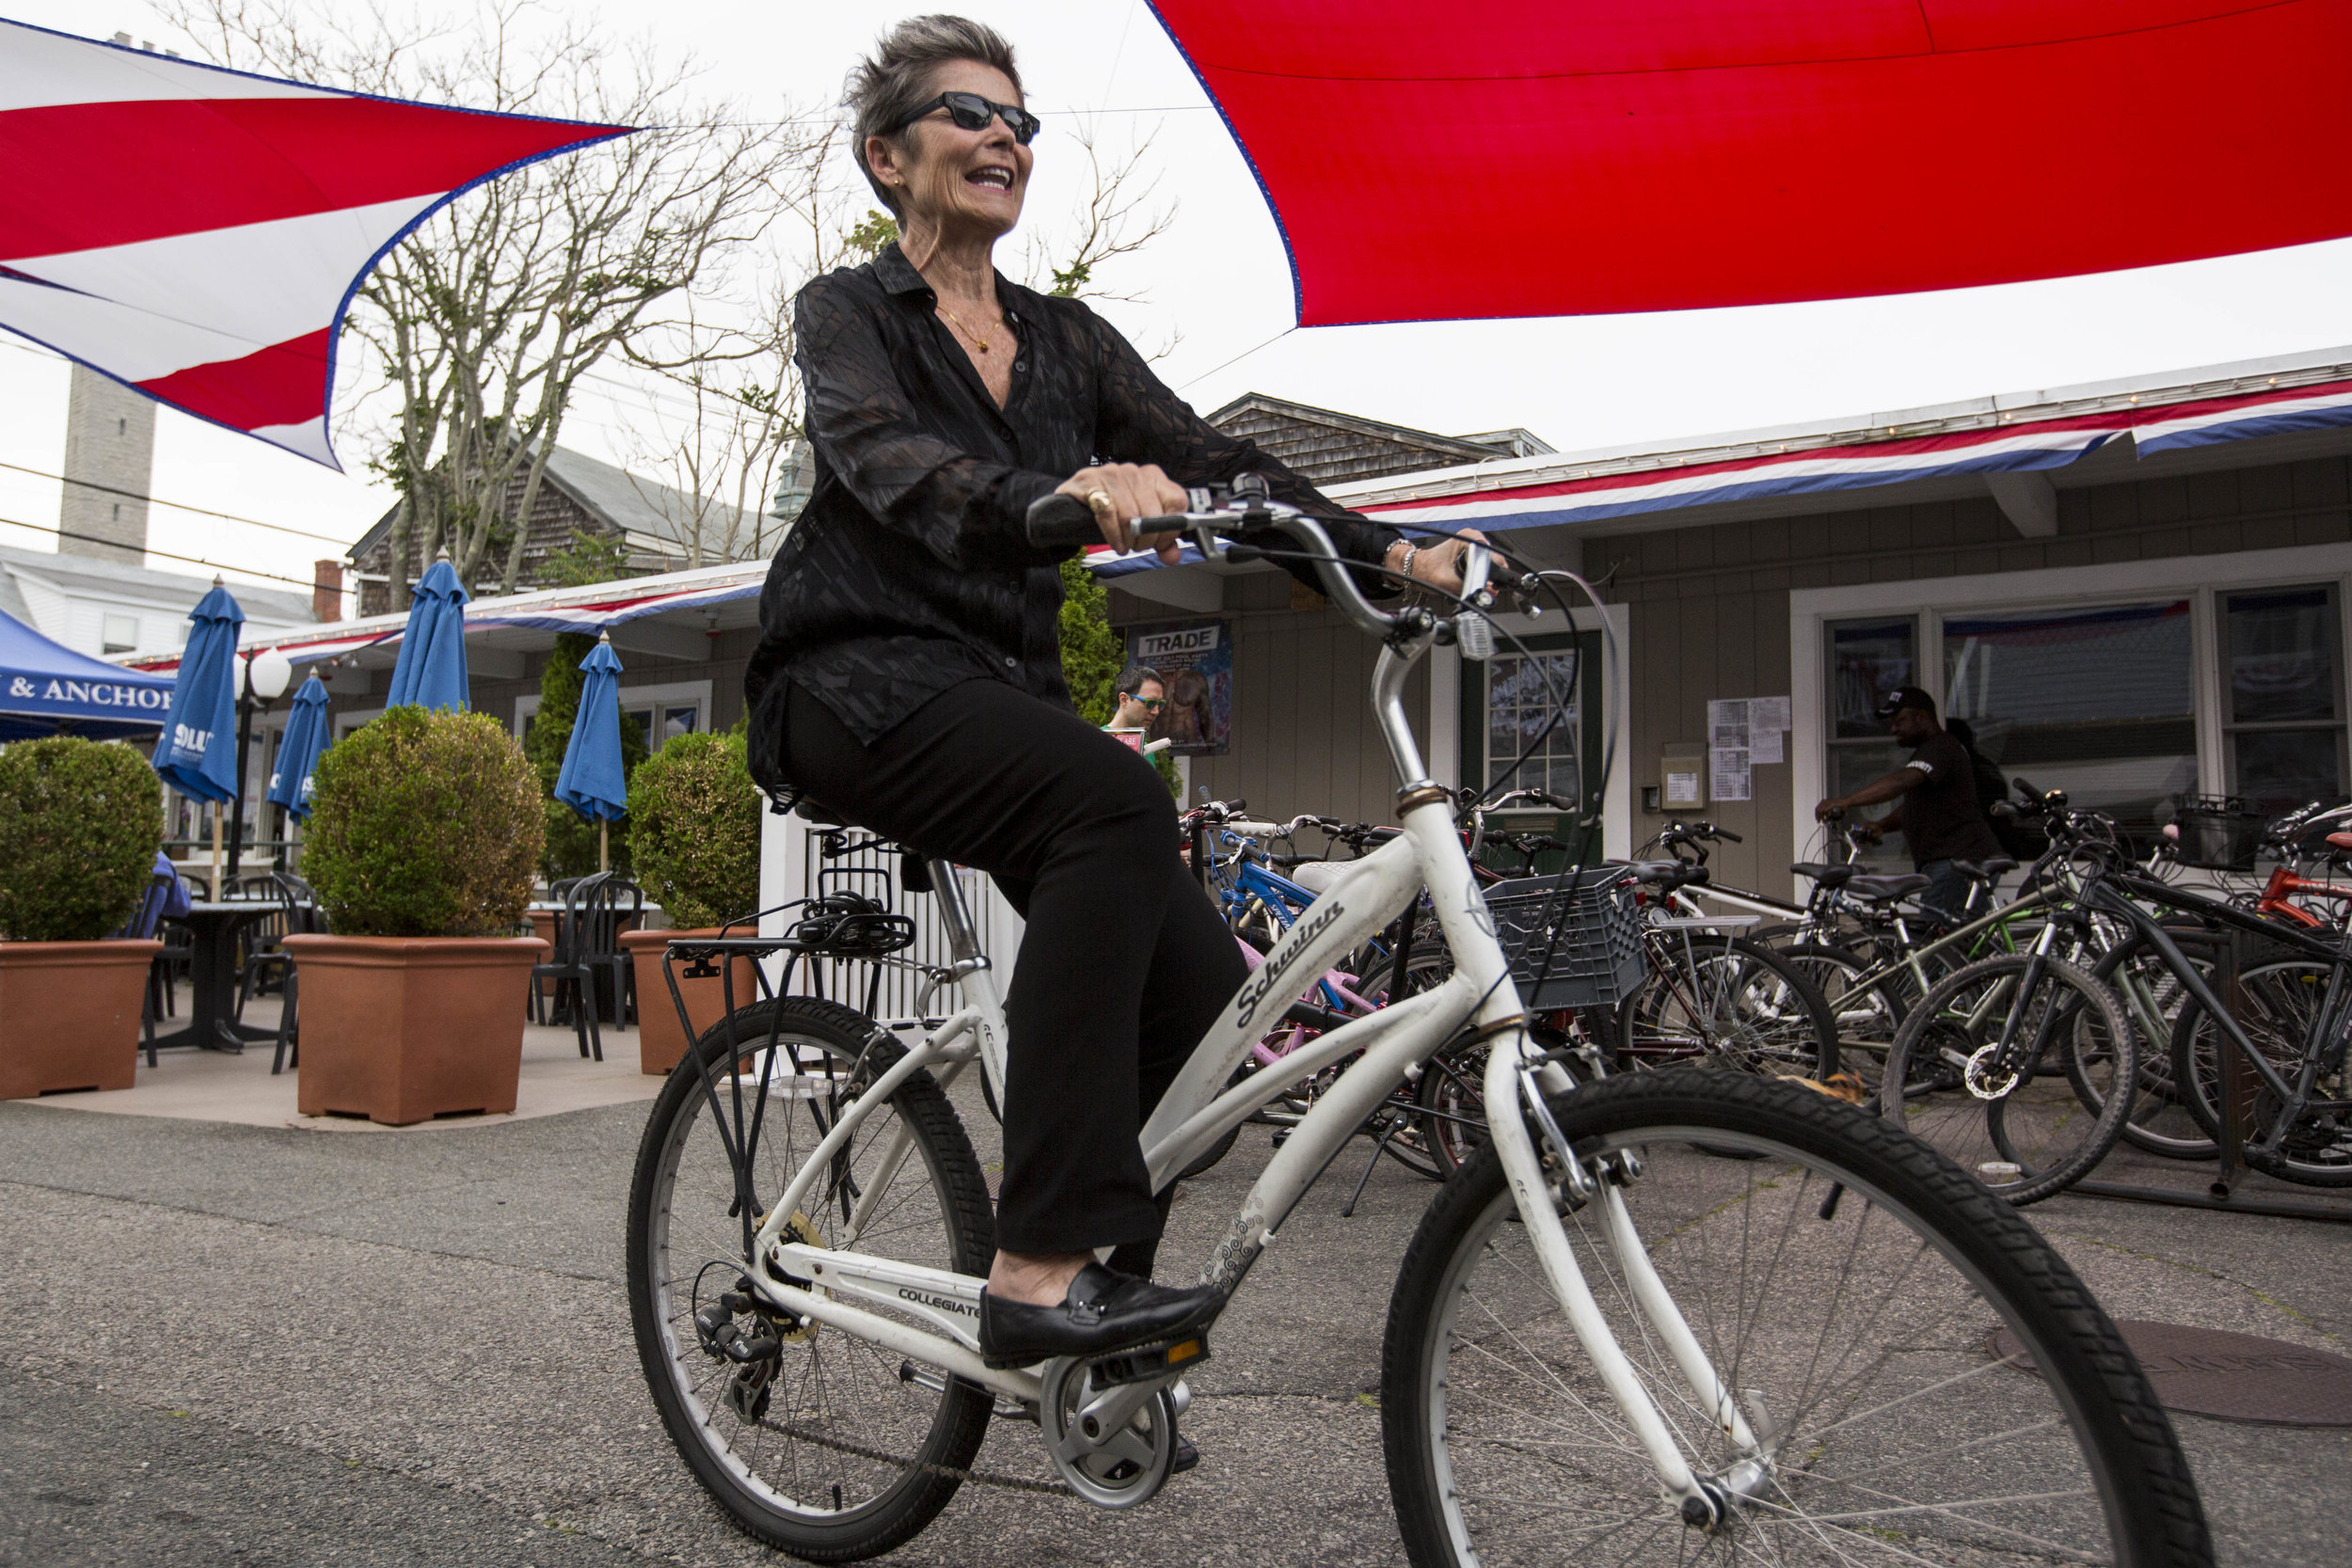  Kate Clinton arrives on her bike at Crown and Anchor for her stand-up comic gig in Provincetown, Massachusetts on July 1, 2017. 